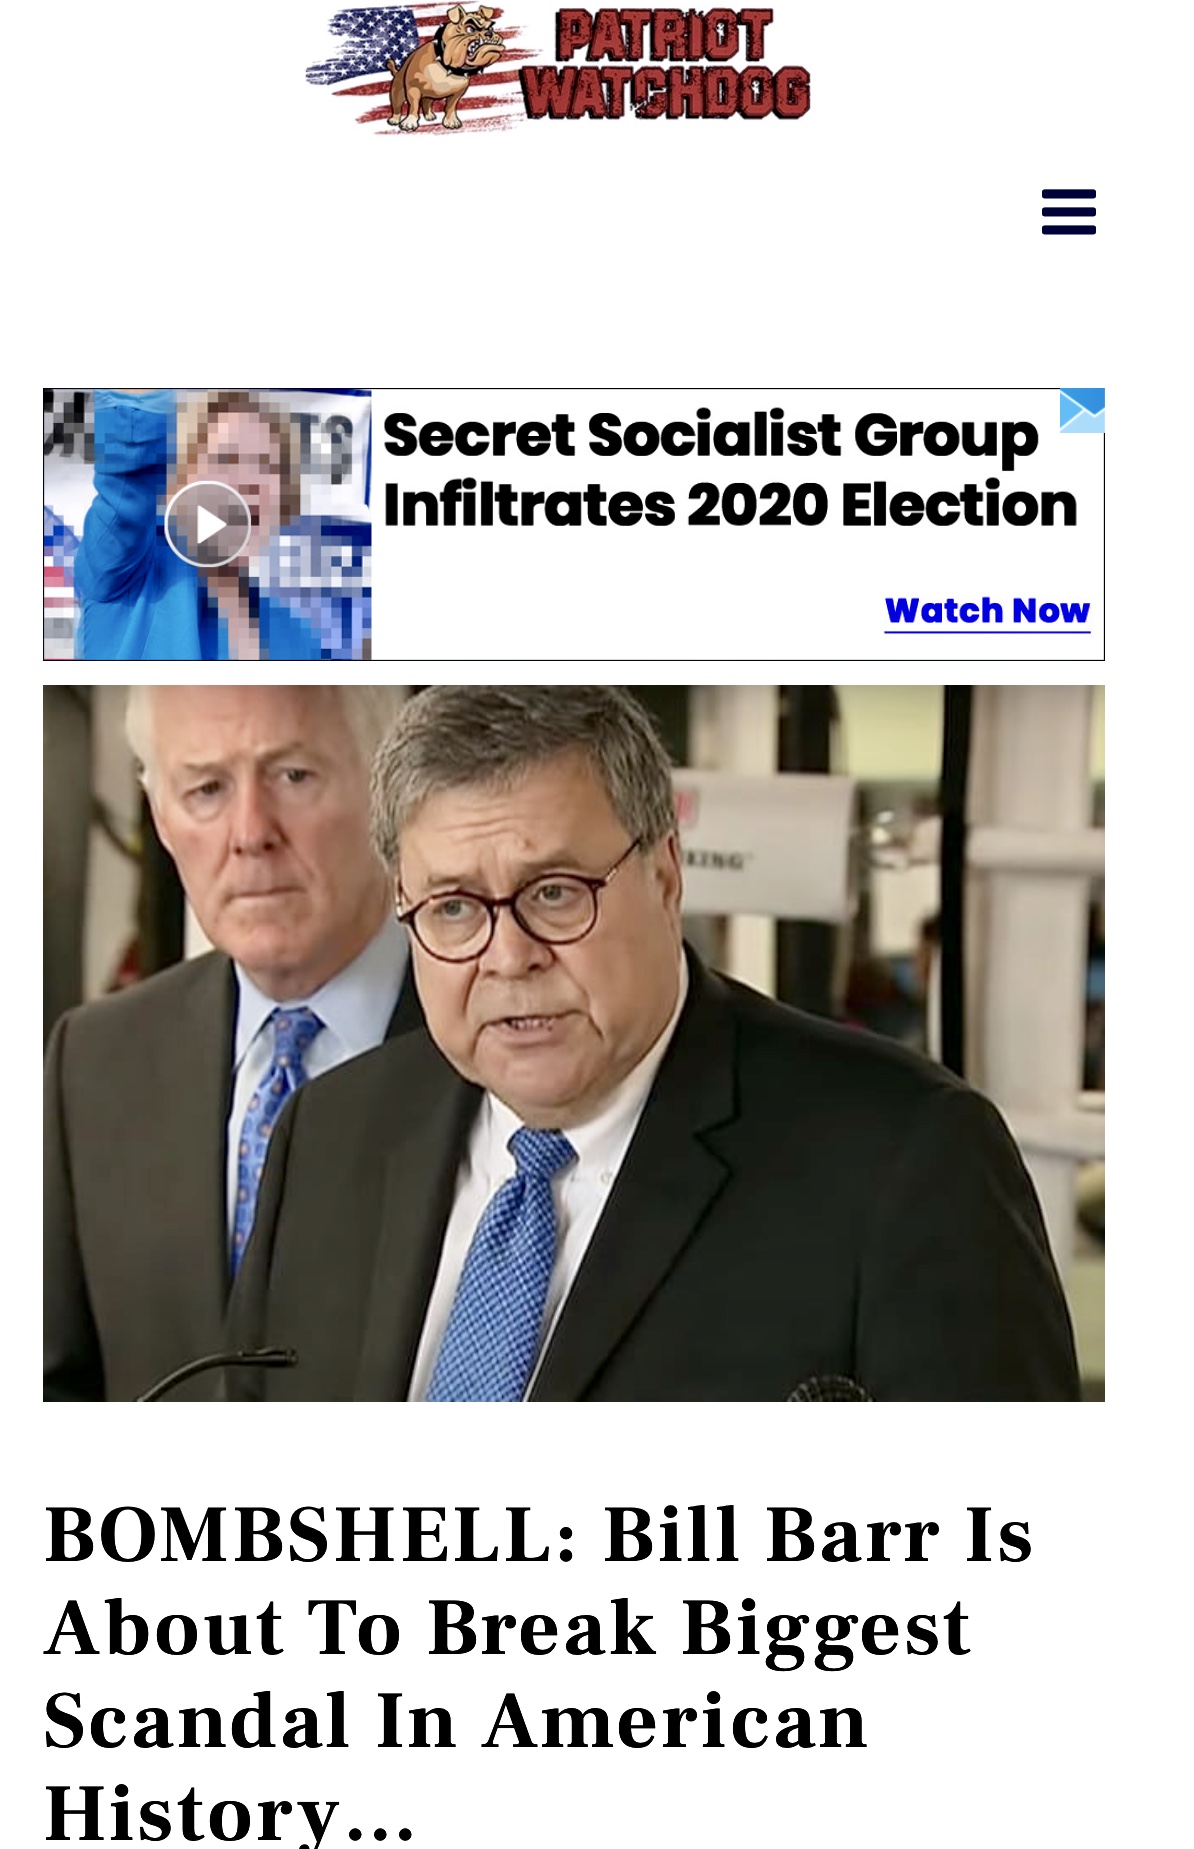 Bill Barr About to Break Biggest Scandal In American History